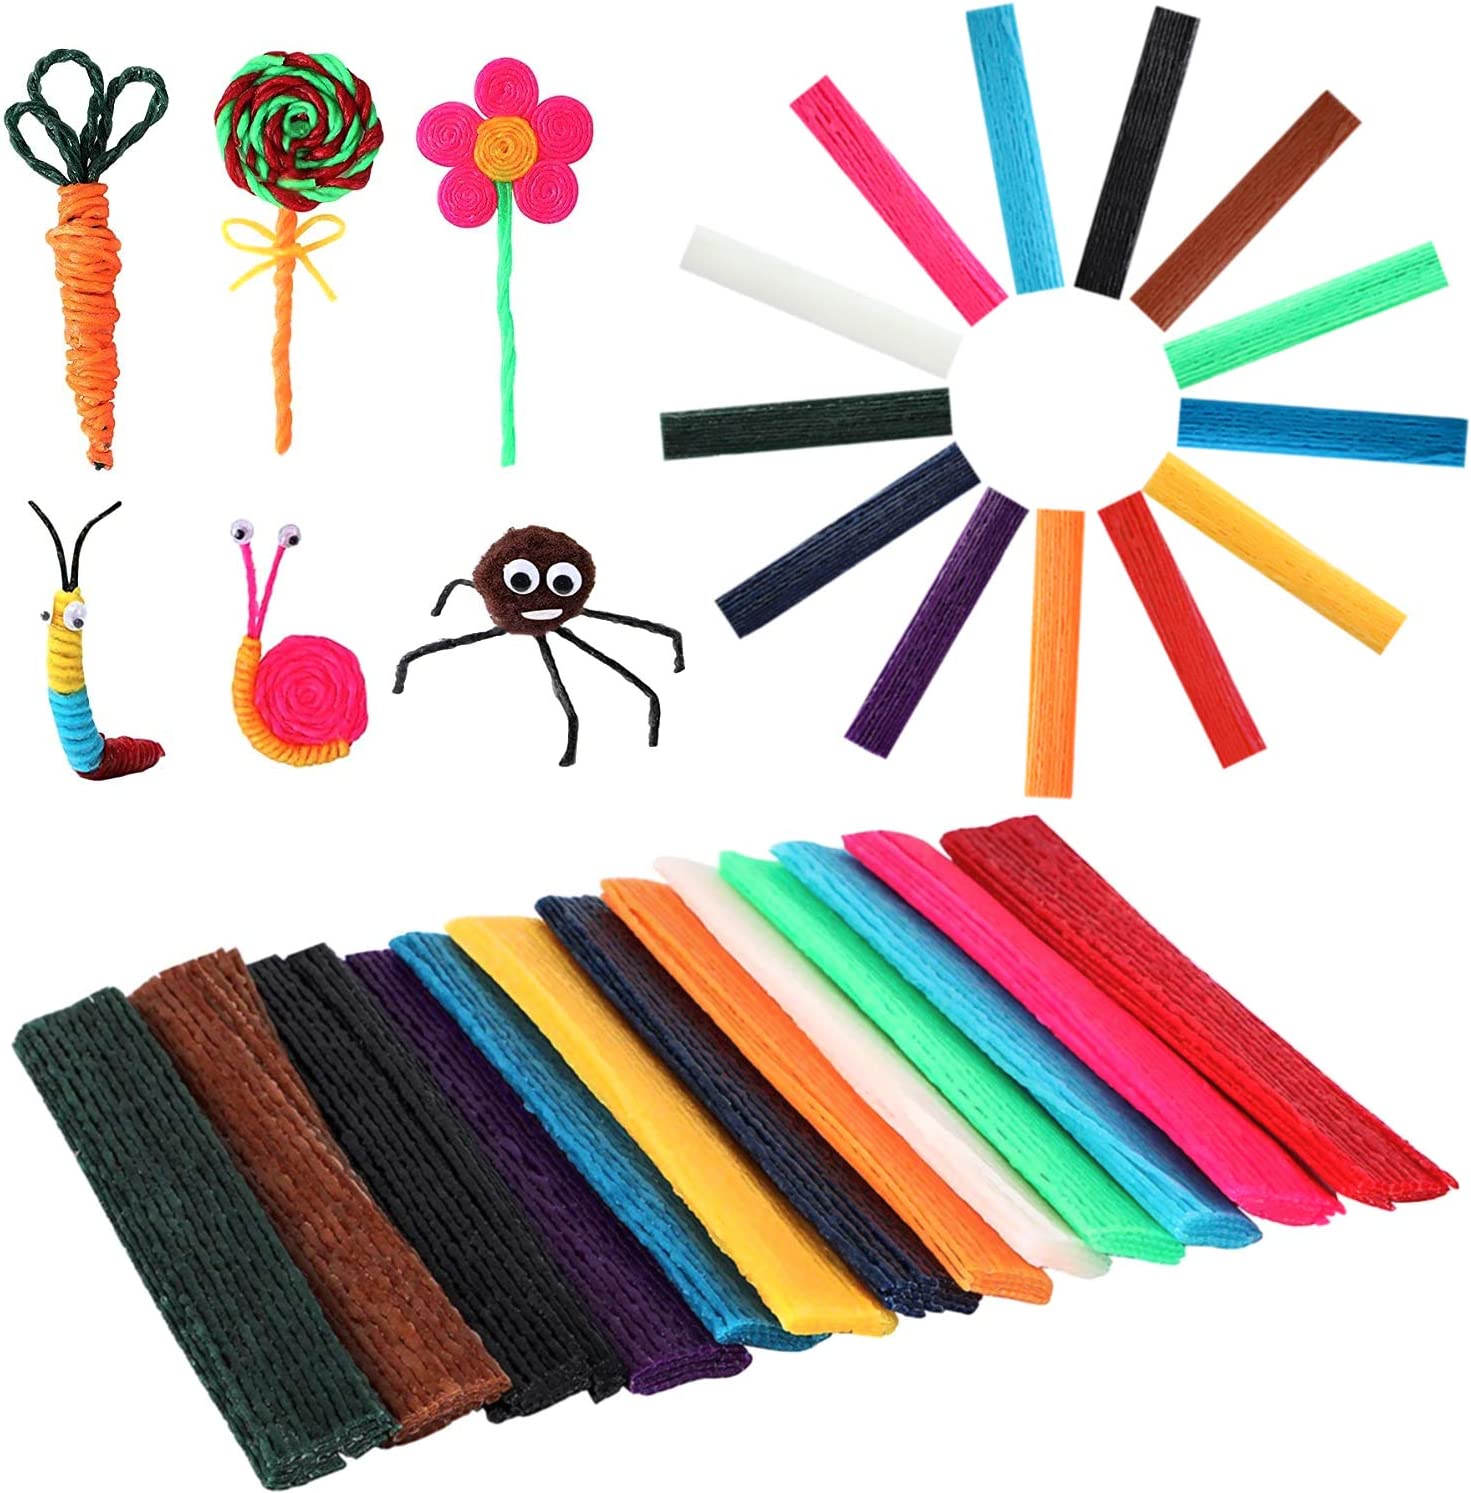  BBTO About 640 Pieces Sticky Wax Yarn Sticks Monkey String  Bendable for Children DIY School Project, 13 Colors : Arts, Crafts & Sewing